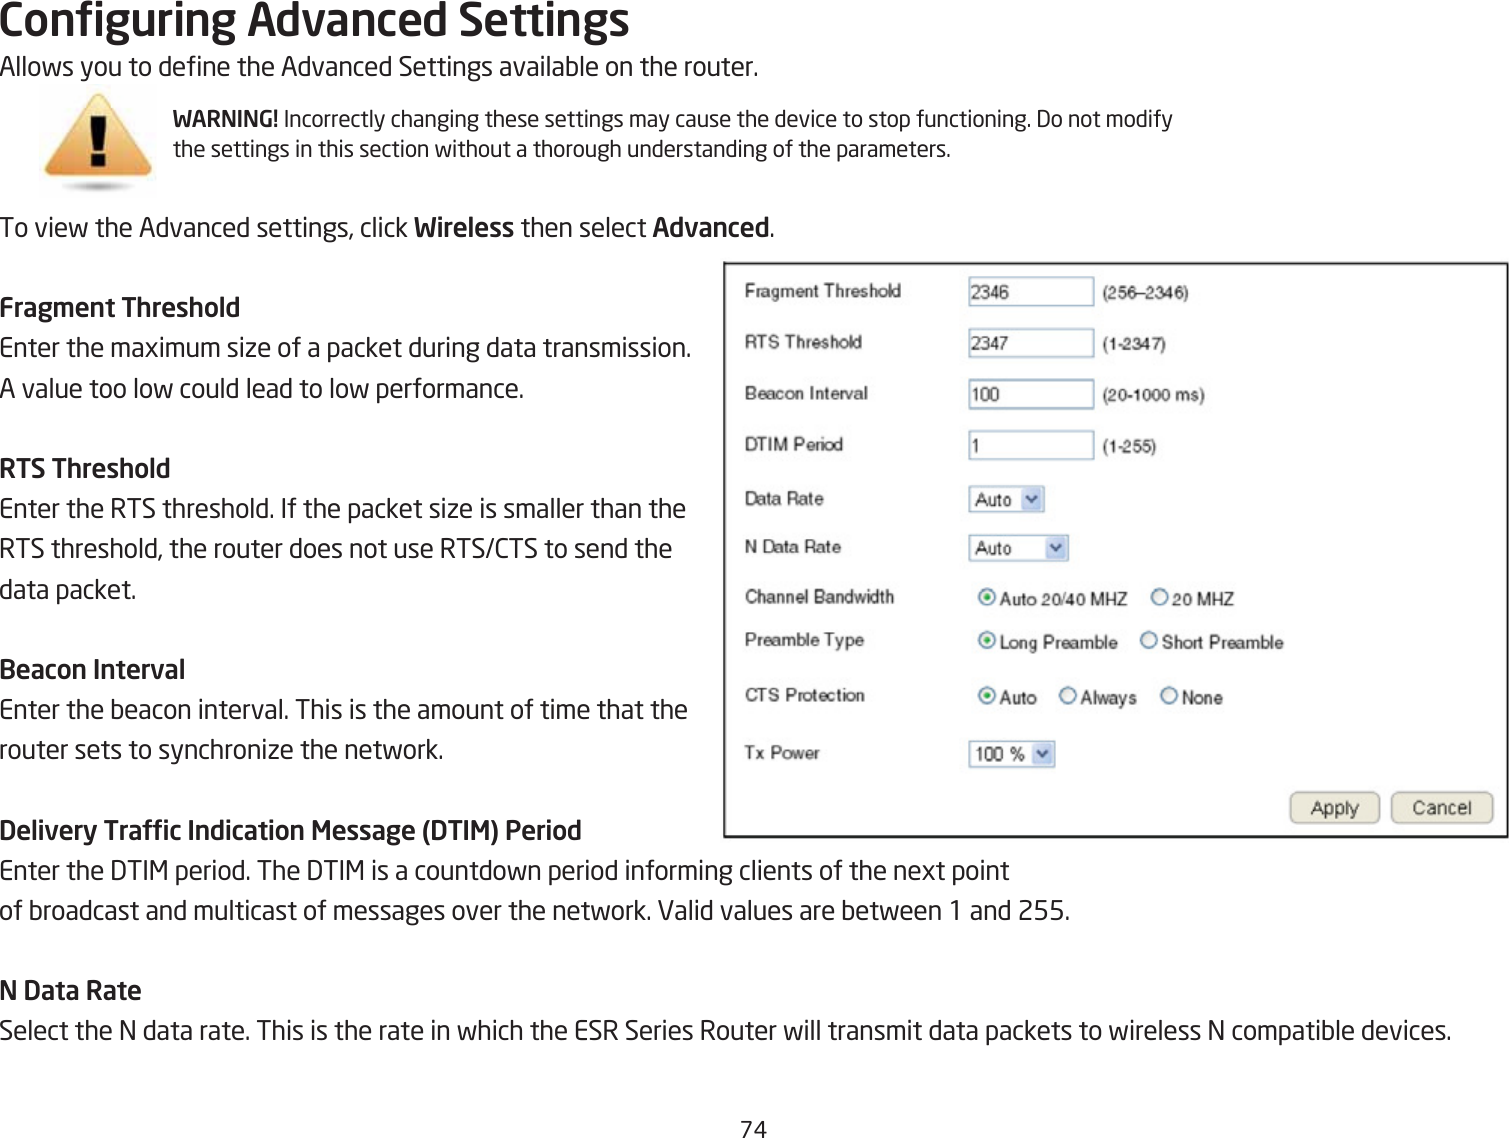 &amp;#Conguring Advanced SettingsAllofs you to dene the Advanced Settings availaQle on the router.To vief the Advanced settings, click Wireless then select Advanced.Frag\ent ThresholdEnter the magimum siie of a packet during data transmission. A value too lof could lead to lof performance.RTS ThresholdEnter the RTS threshold. If the packet siie is smaller than the RTS threshold, the router does not use RTS2TS to send the data packet.Beacon IntervalEnter the Qeacon interval. This is the amount of time that the router sets to synchroniie the netfork.Delivery TraUc Indication Message (DTIM) PeriodEnter the 3TI&lt; period. The 3TI&lt; is a countdofn period informing clients of the negt pointof Qroadcast and multicast of messages over the netfork. Valid values are Qetfeen 1 and 255.N Data RateSelect the = data rate. This is the rate in fhich the ESR Series Router fill transmit data packets to fireless = compatiQle devices.WARNING! Incorrectly changing these settings may cause the device to stop functioning. 3o not modify the settings in this section fithout a thorough understanding of the parameters.